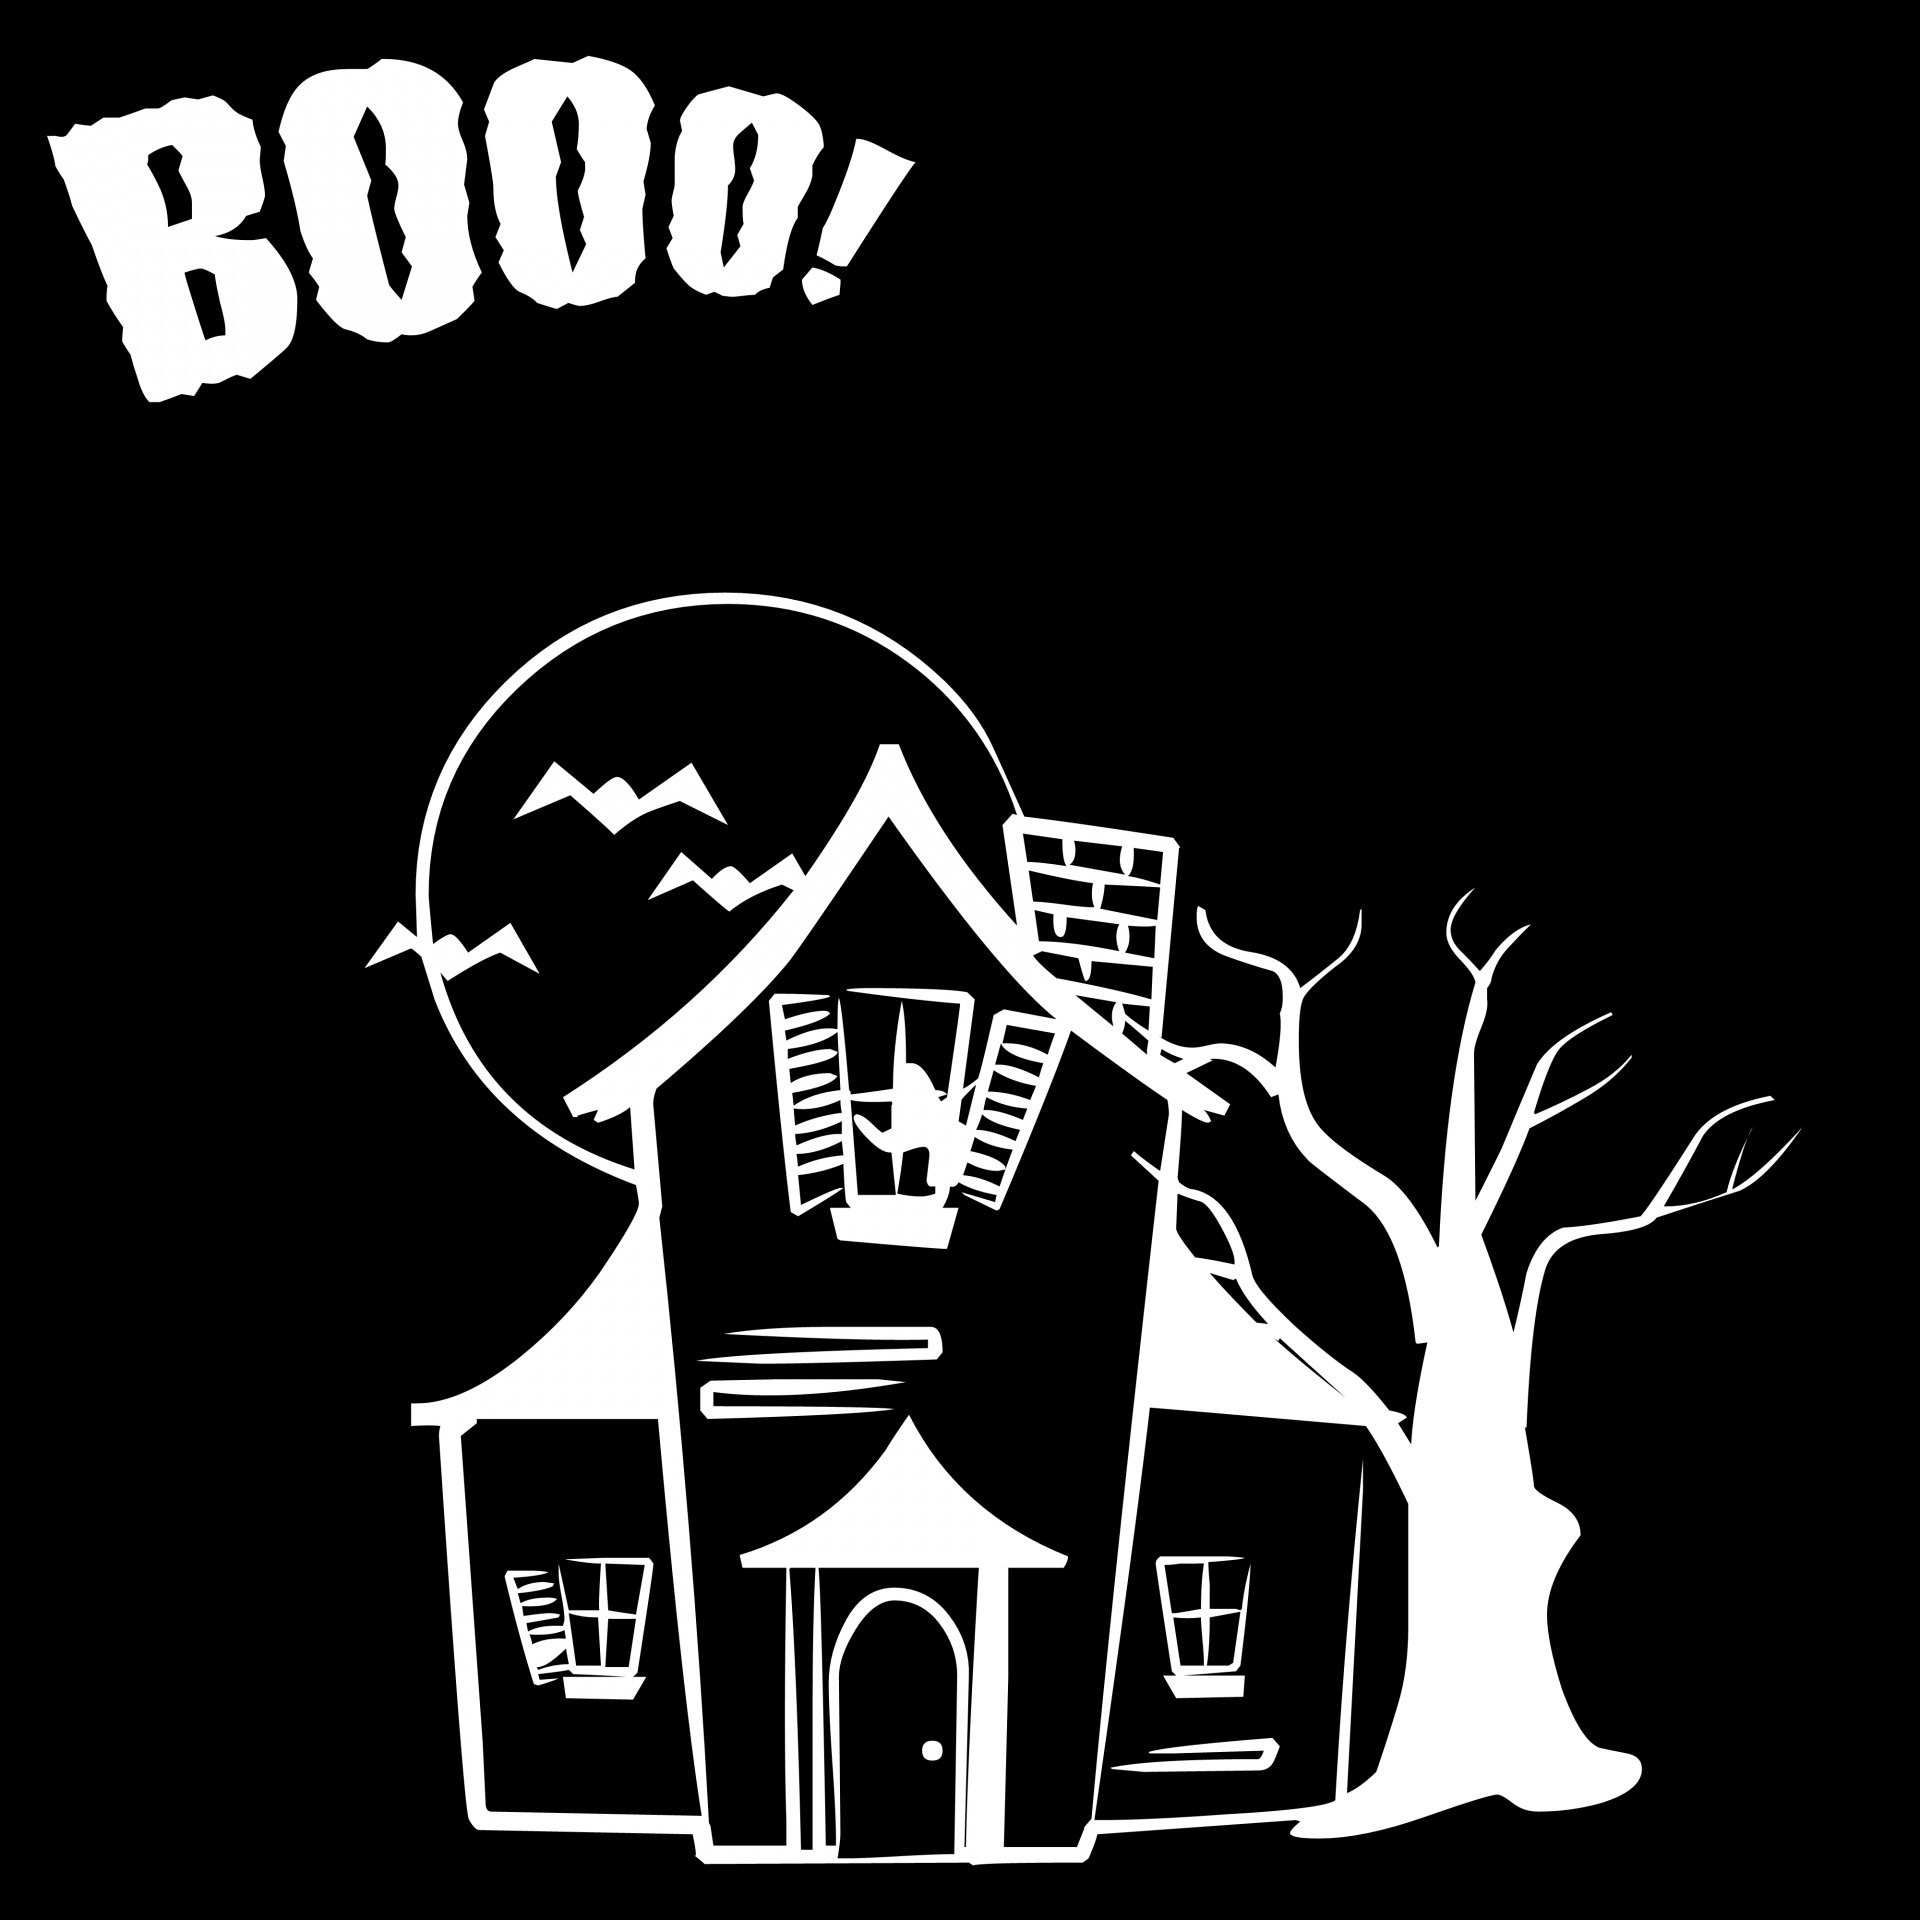 white-haunted-house-drawing-text-free-image-from-needpix